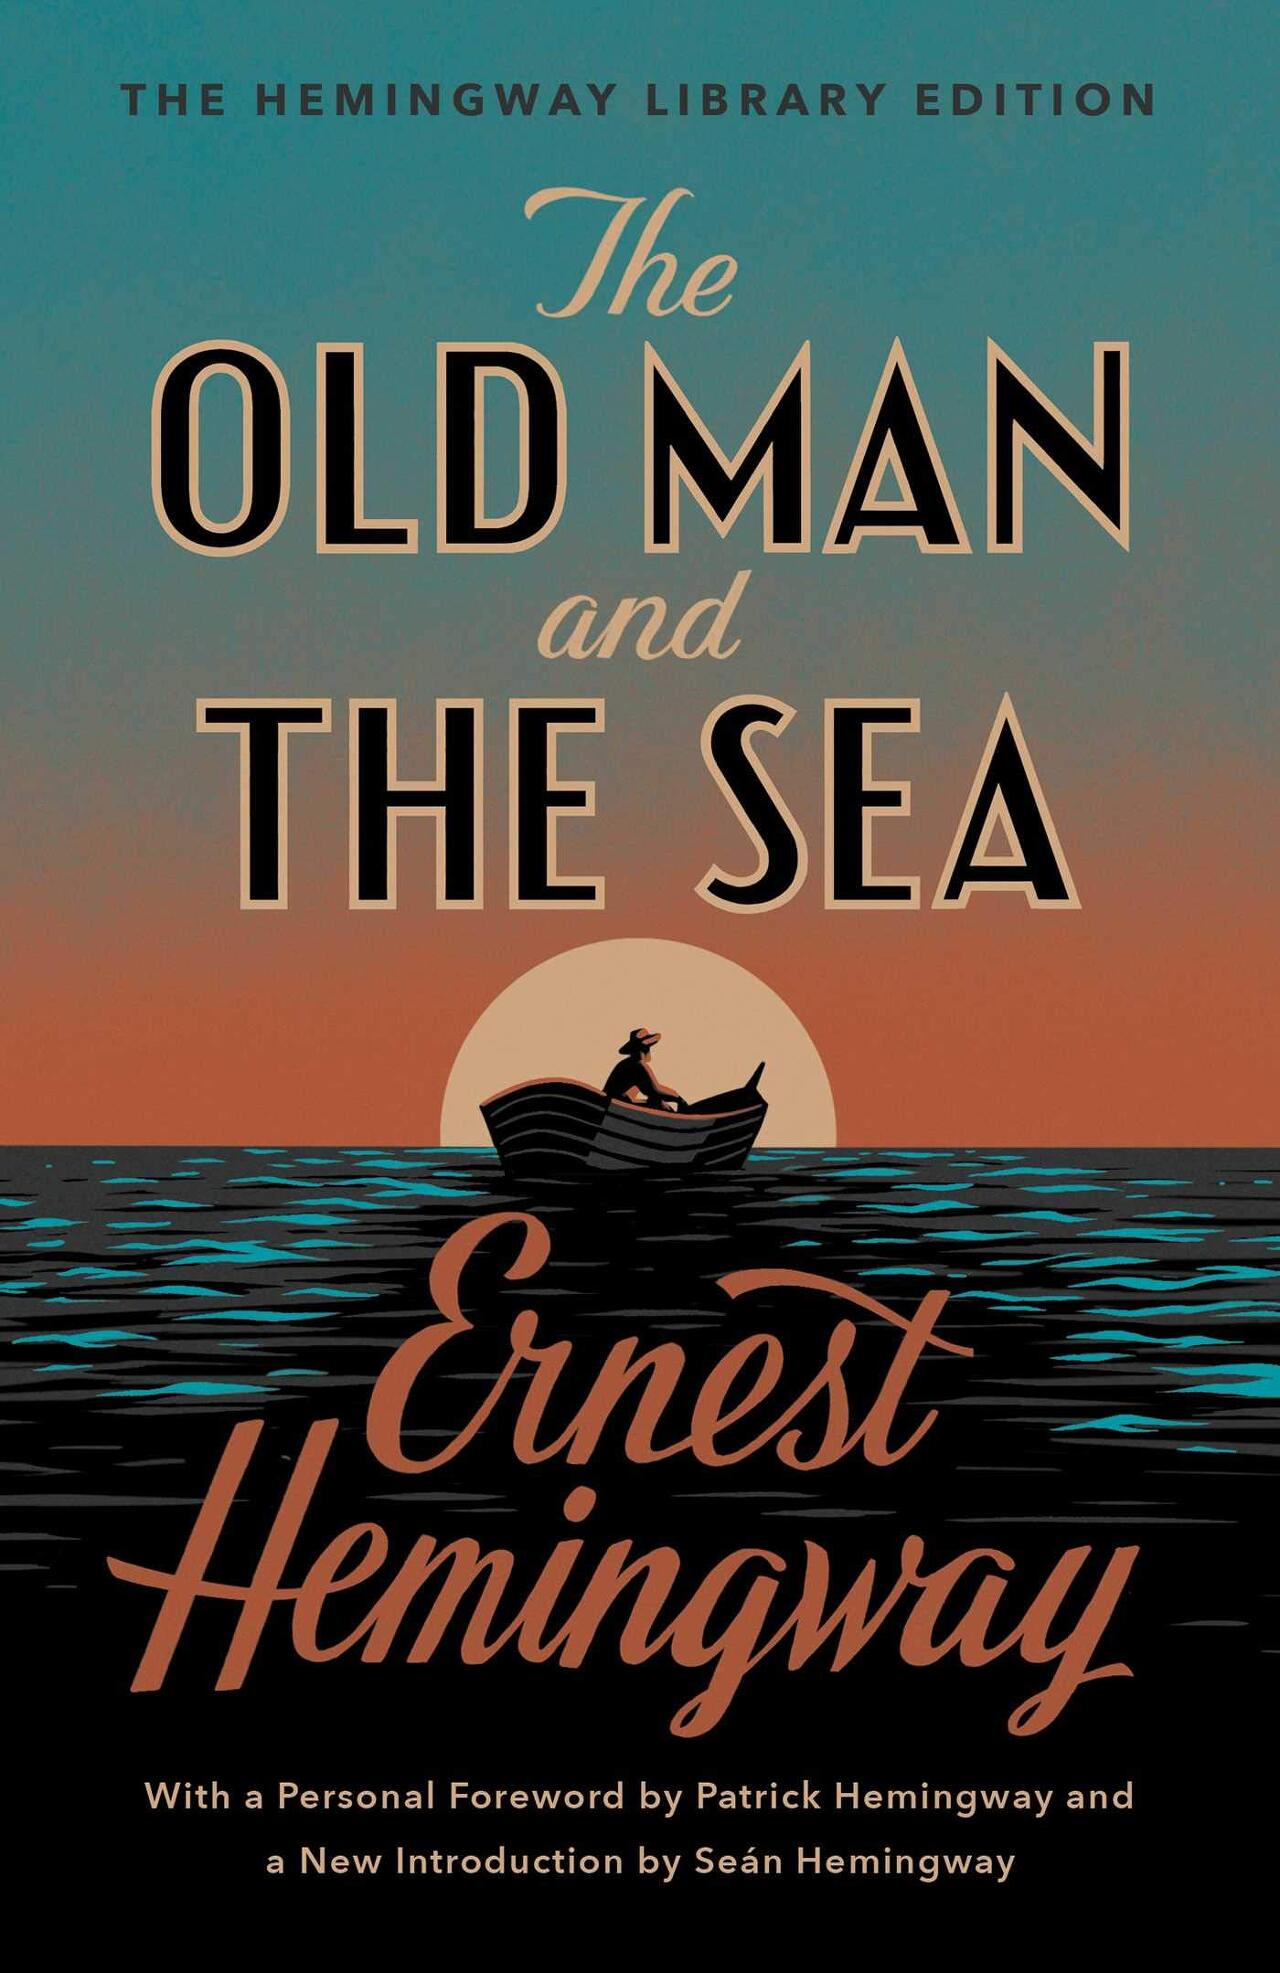 the old man and the sea online